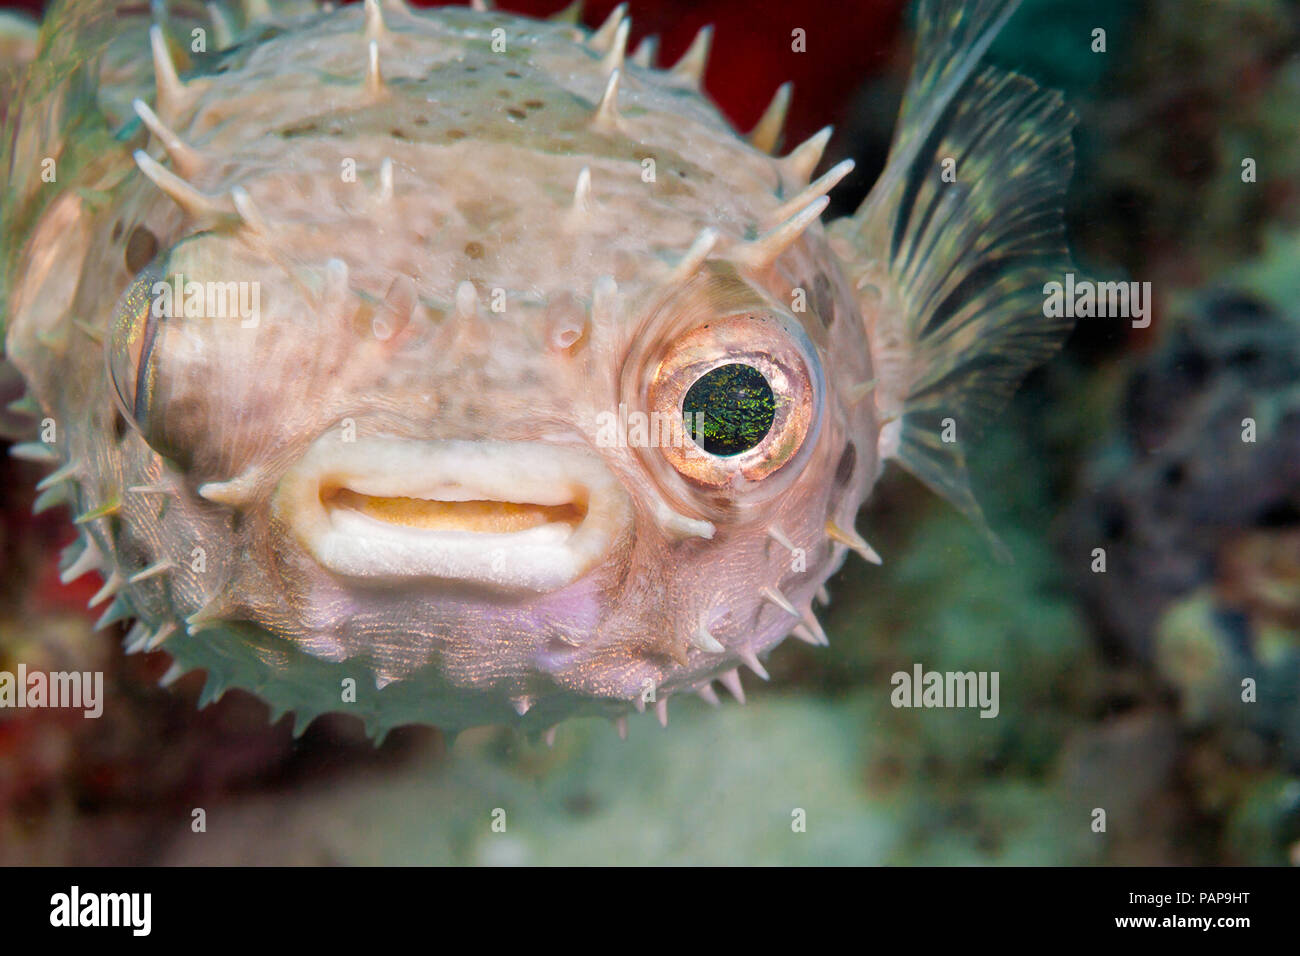 This rounded porcupinefish, Cyclichthys orbicularis, also known as a spiny pufferfish, is nocturnal. During the day it usually hides in large sponges, Stock Photo